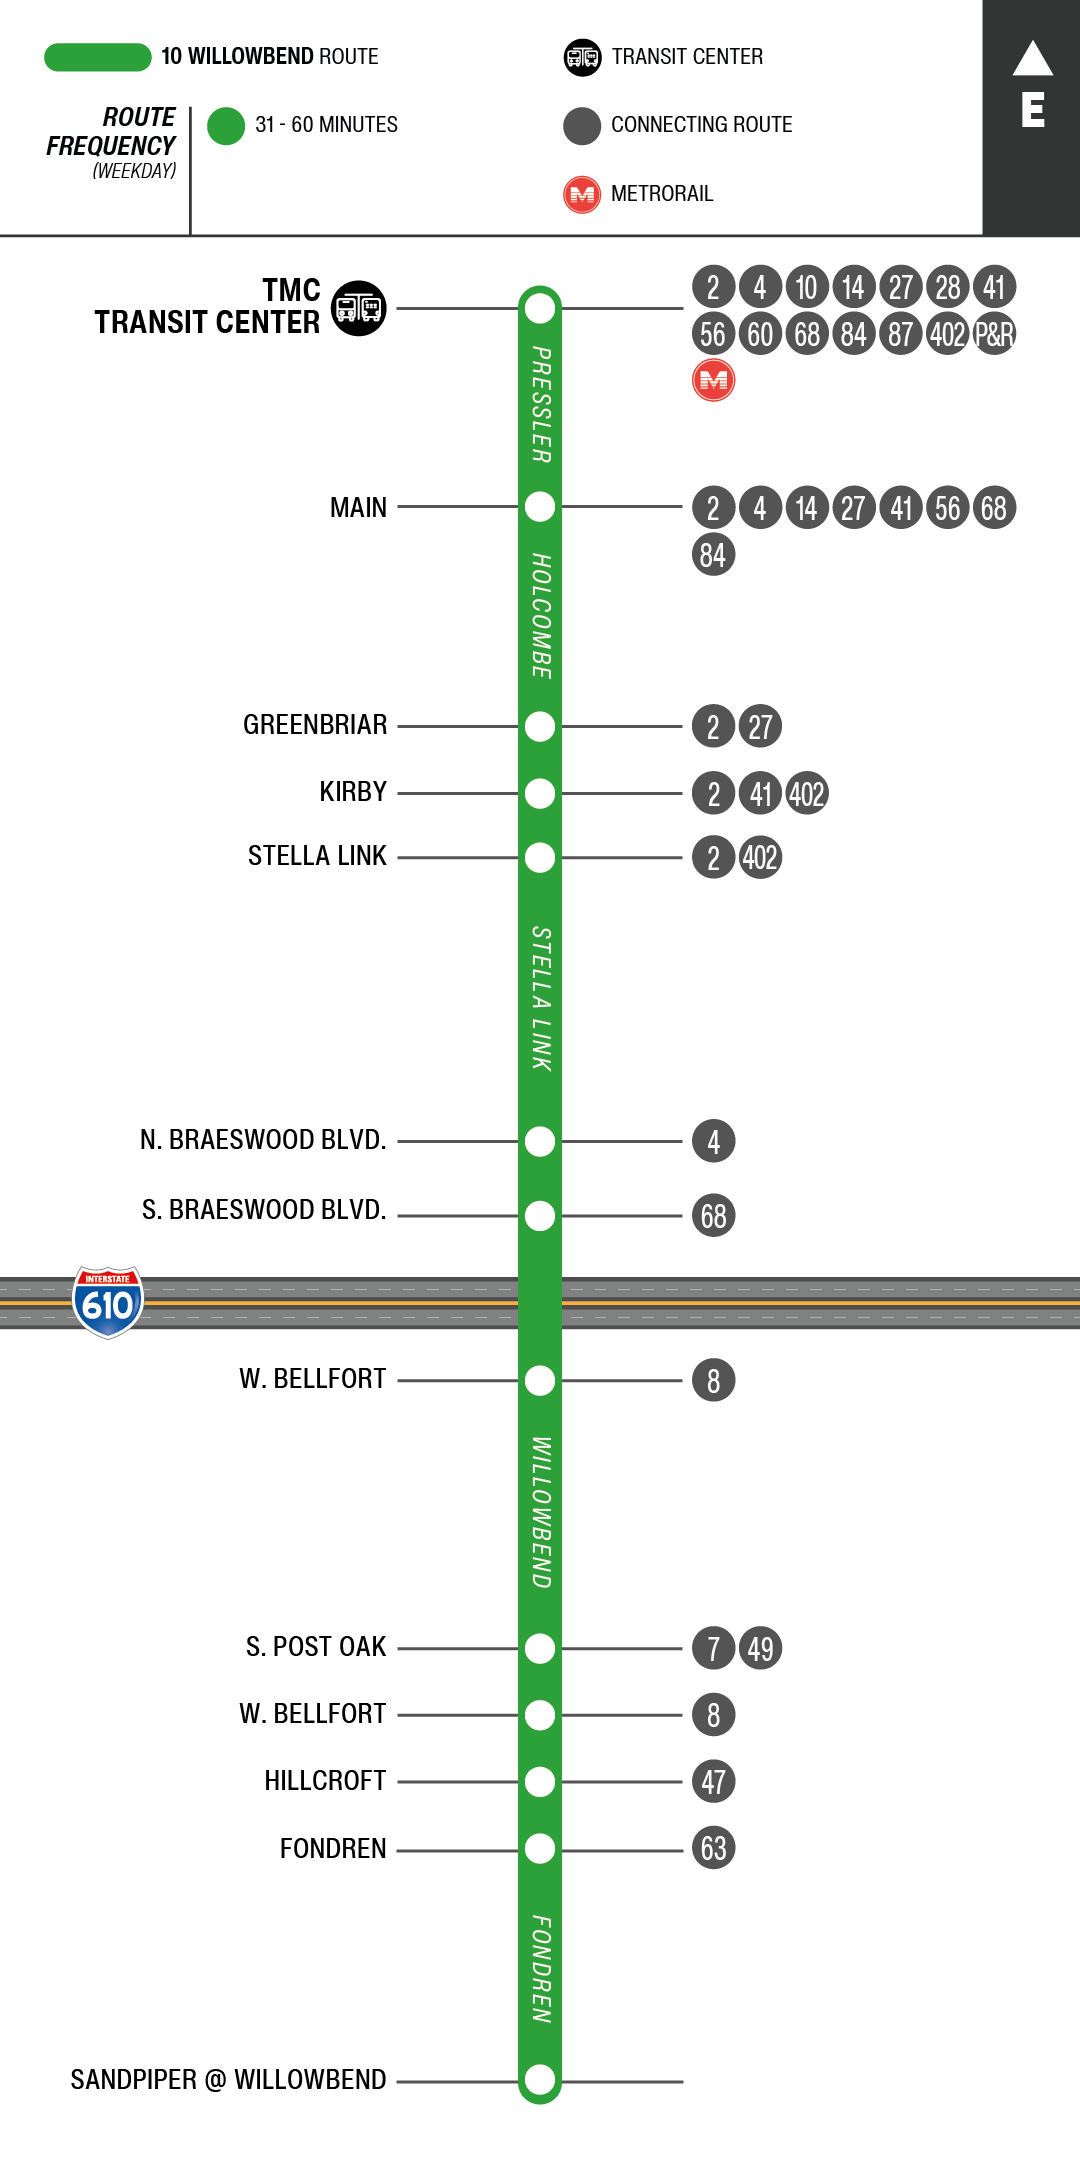 Route map for 10 Willowbend bus